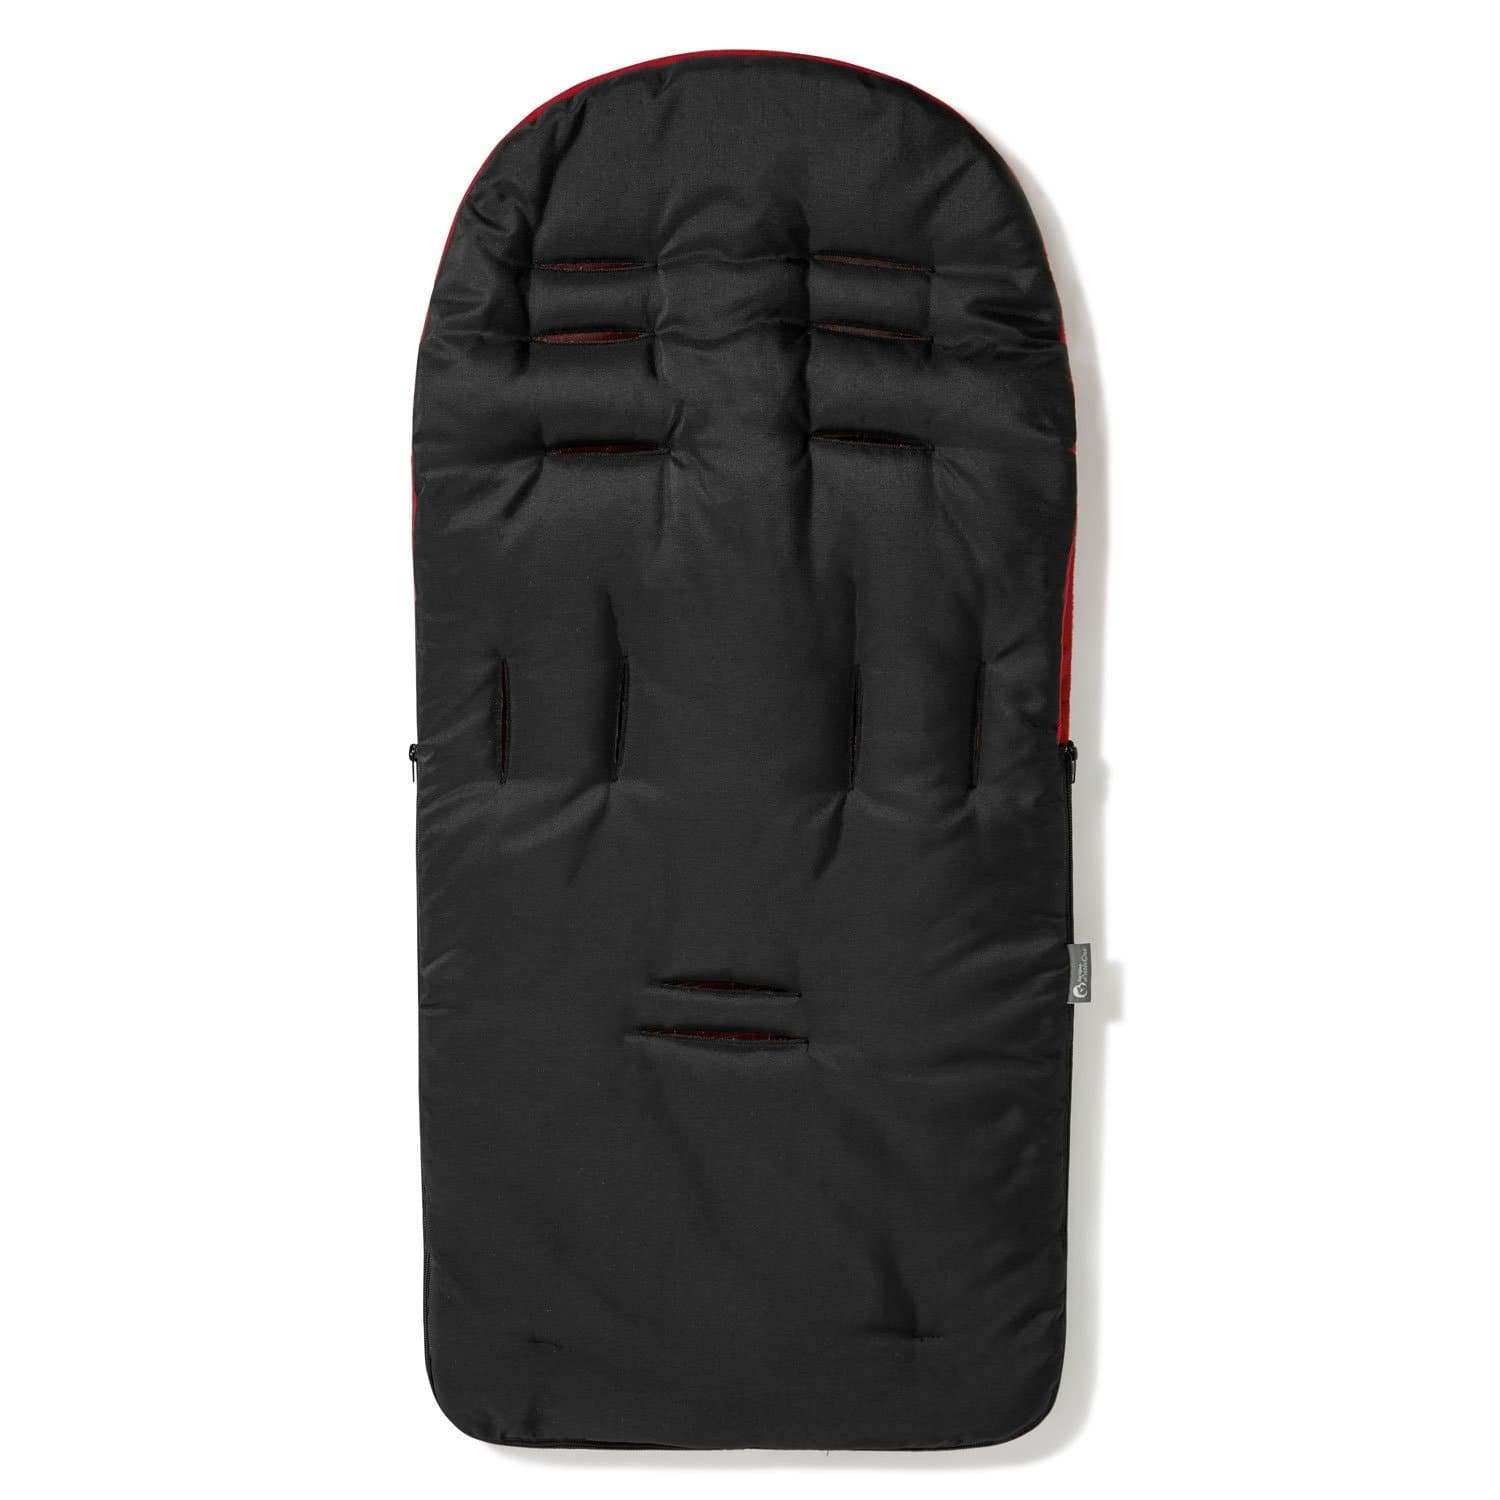 Premium Footmuff / Cosy Toes Compatible with BOB - For Your Little One